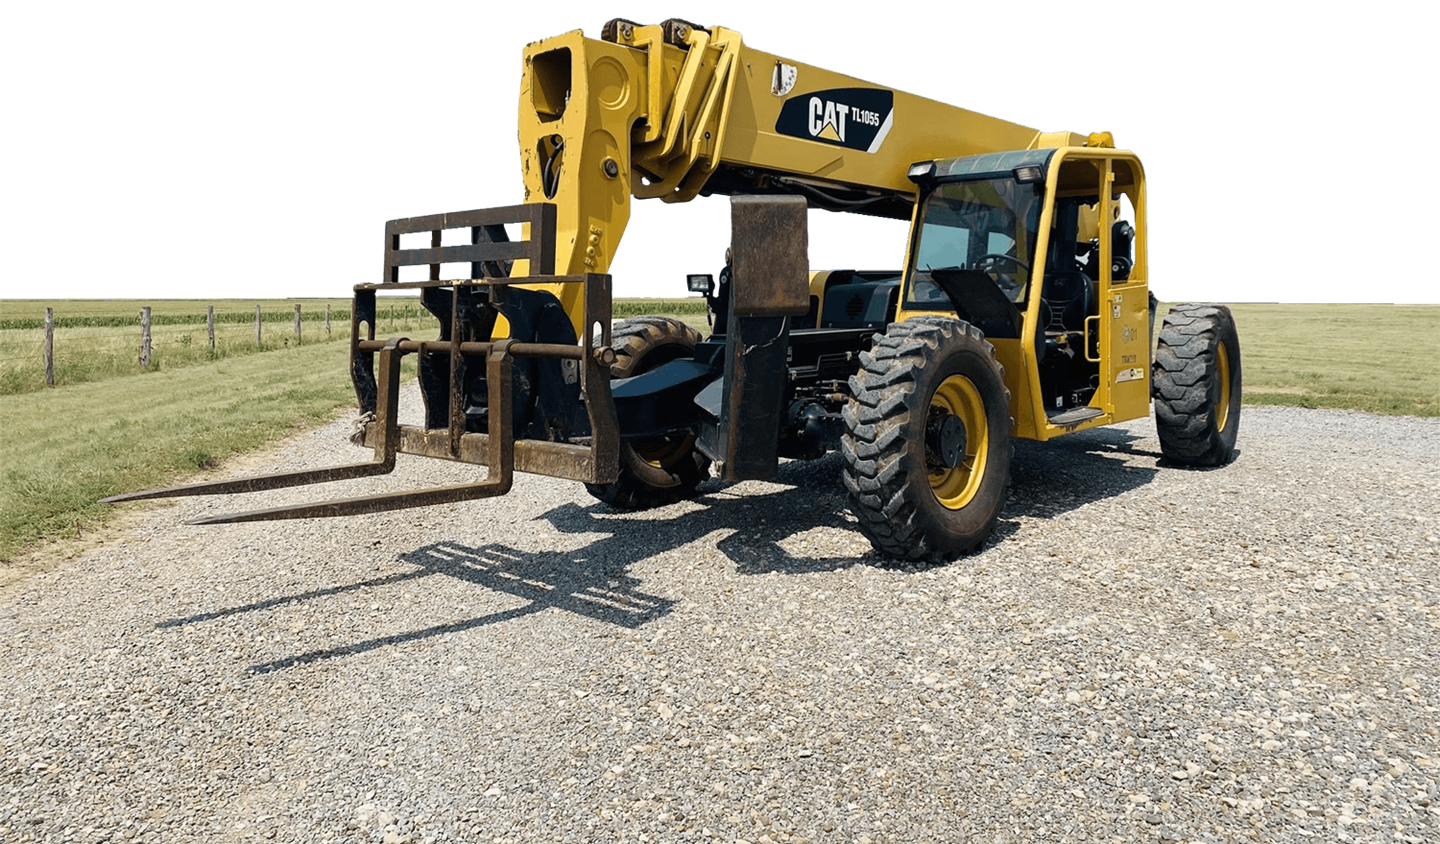 Elevate your operations to new heights with the right Telehandler